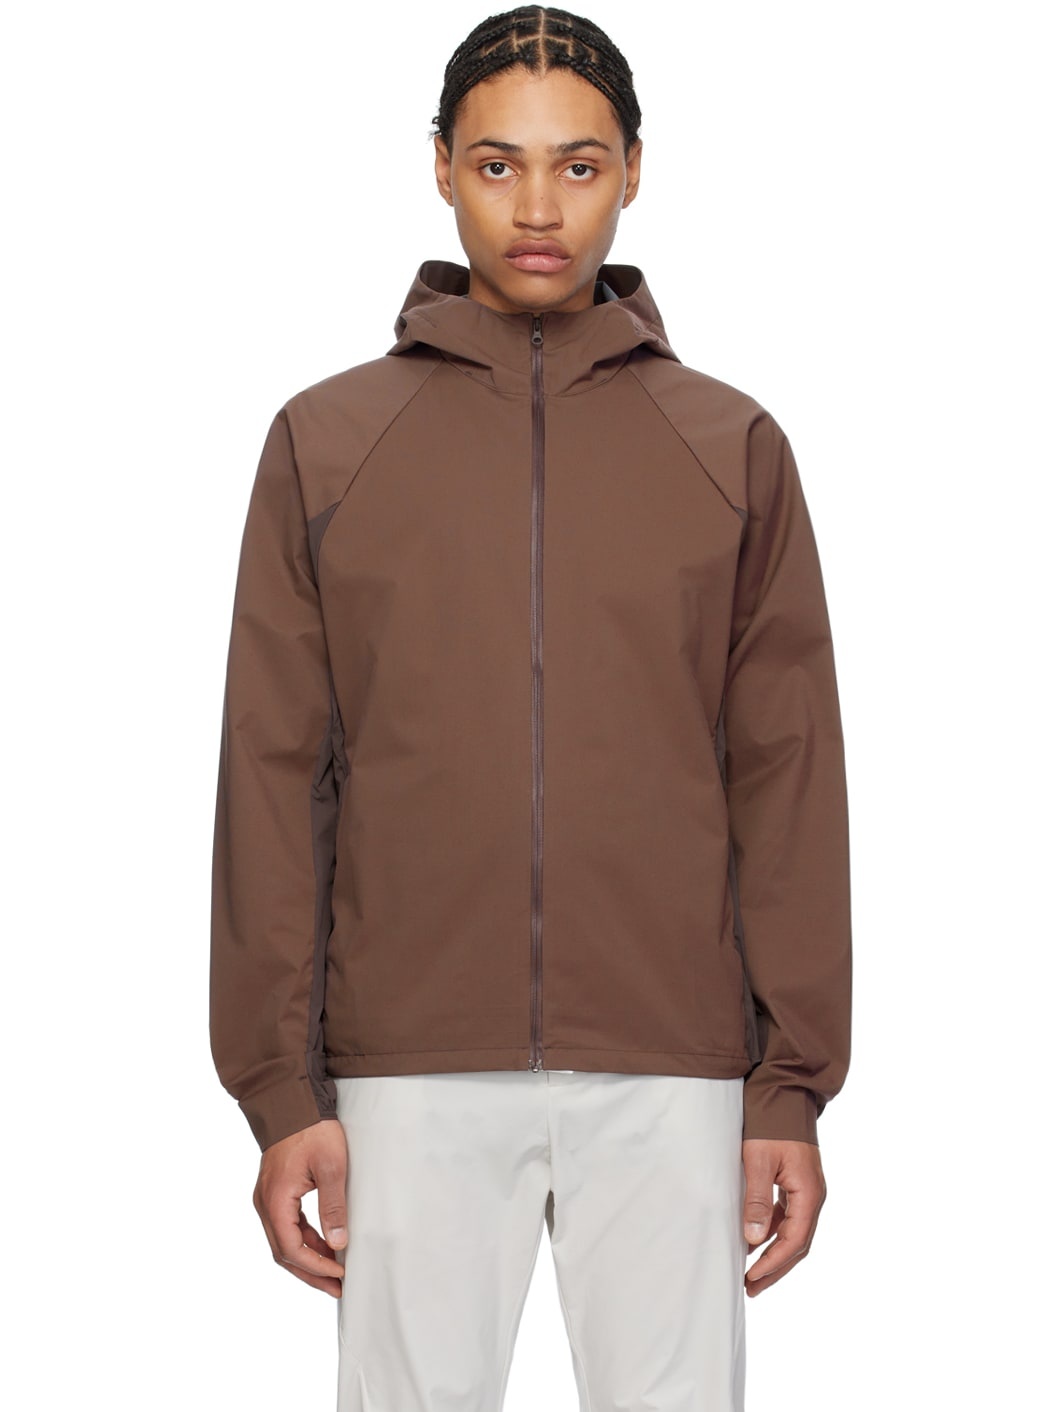 Brown 6.0 Right Technical Jacket - 1